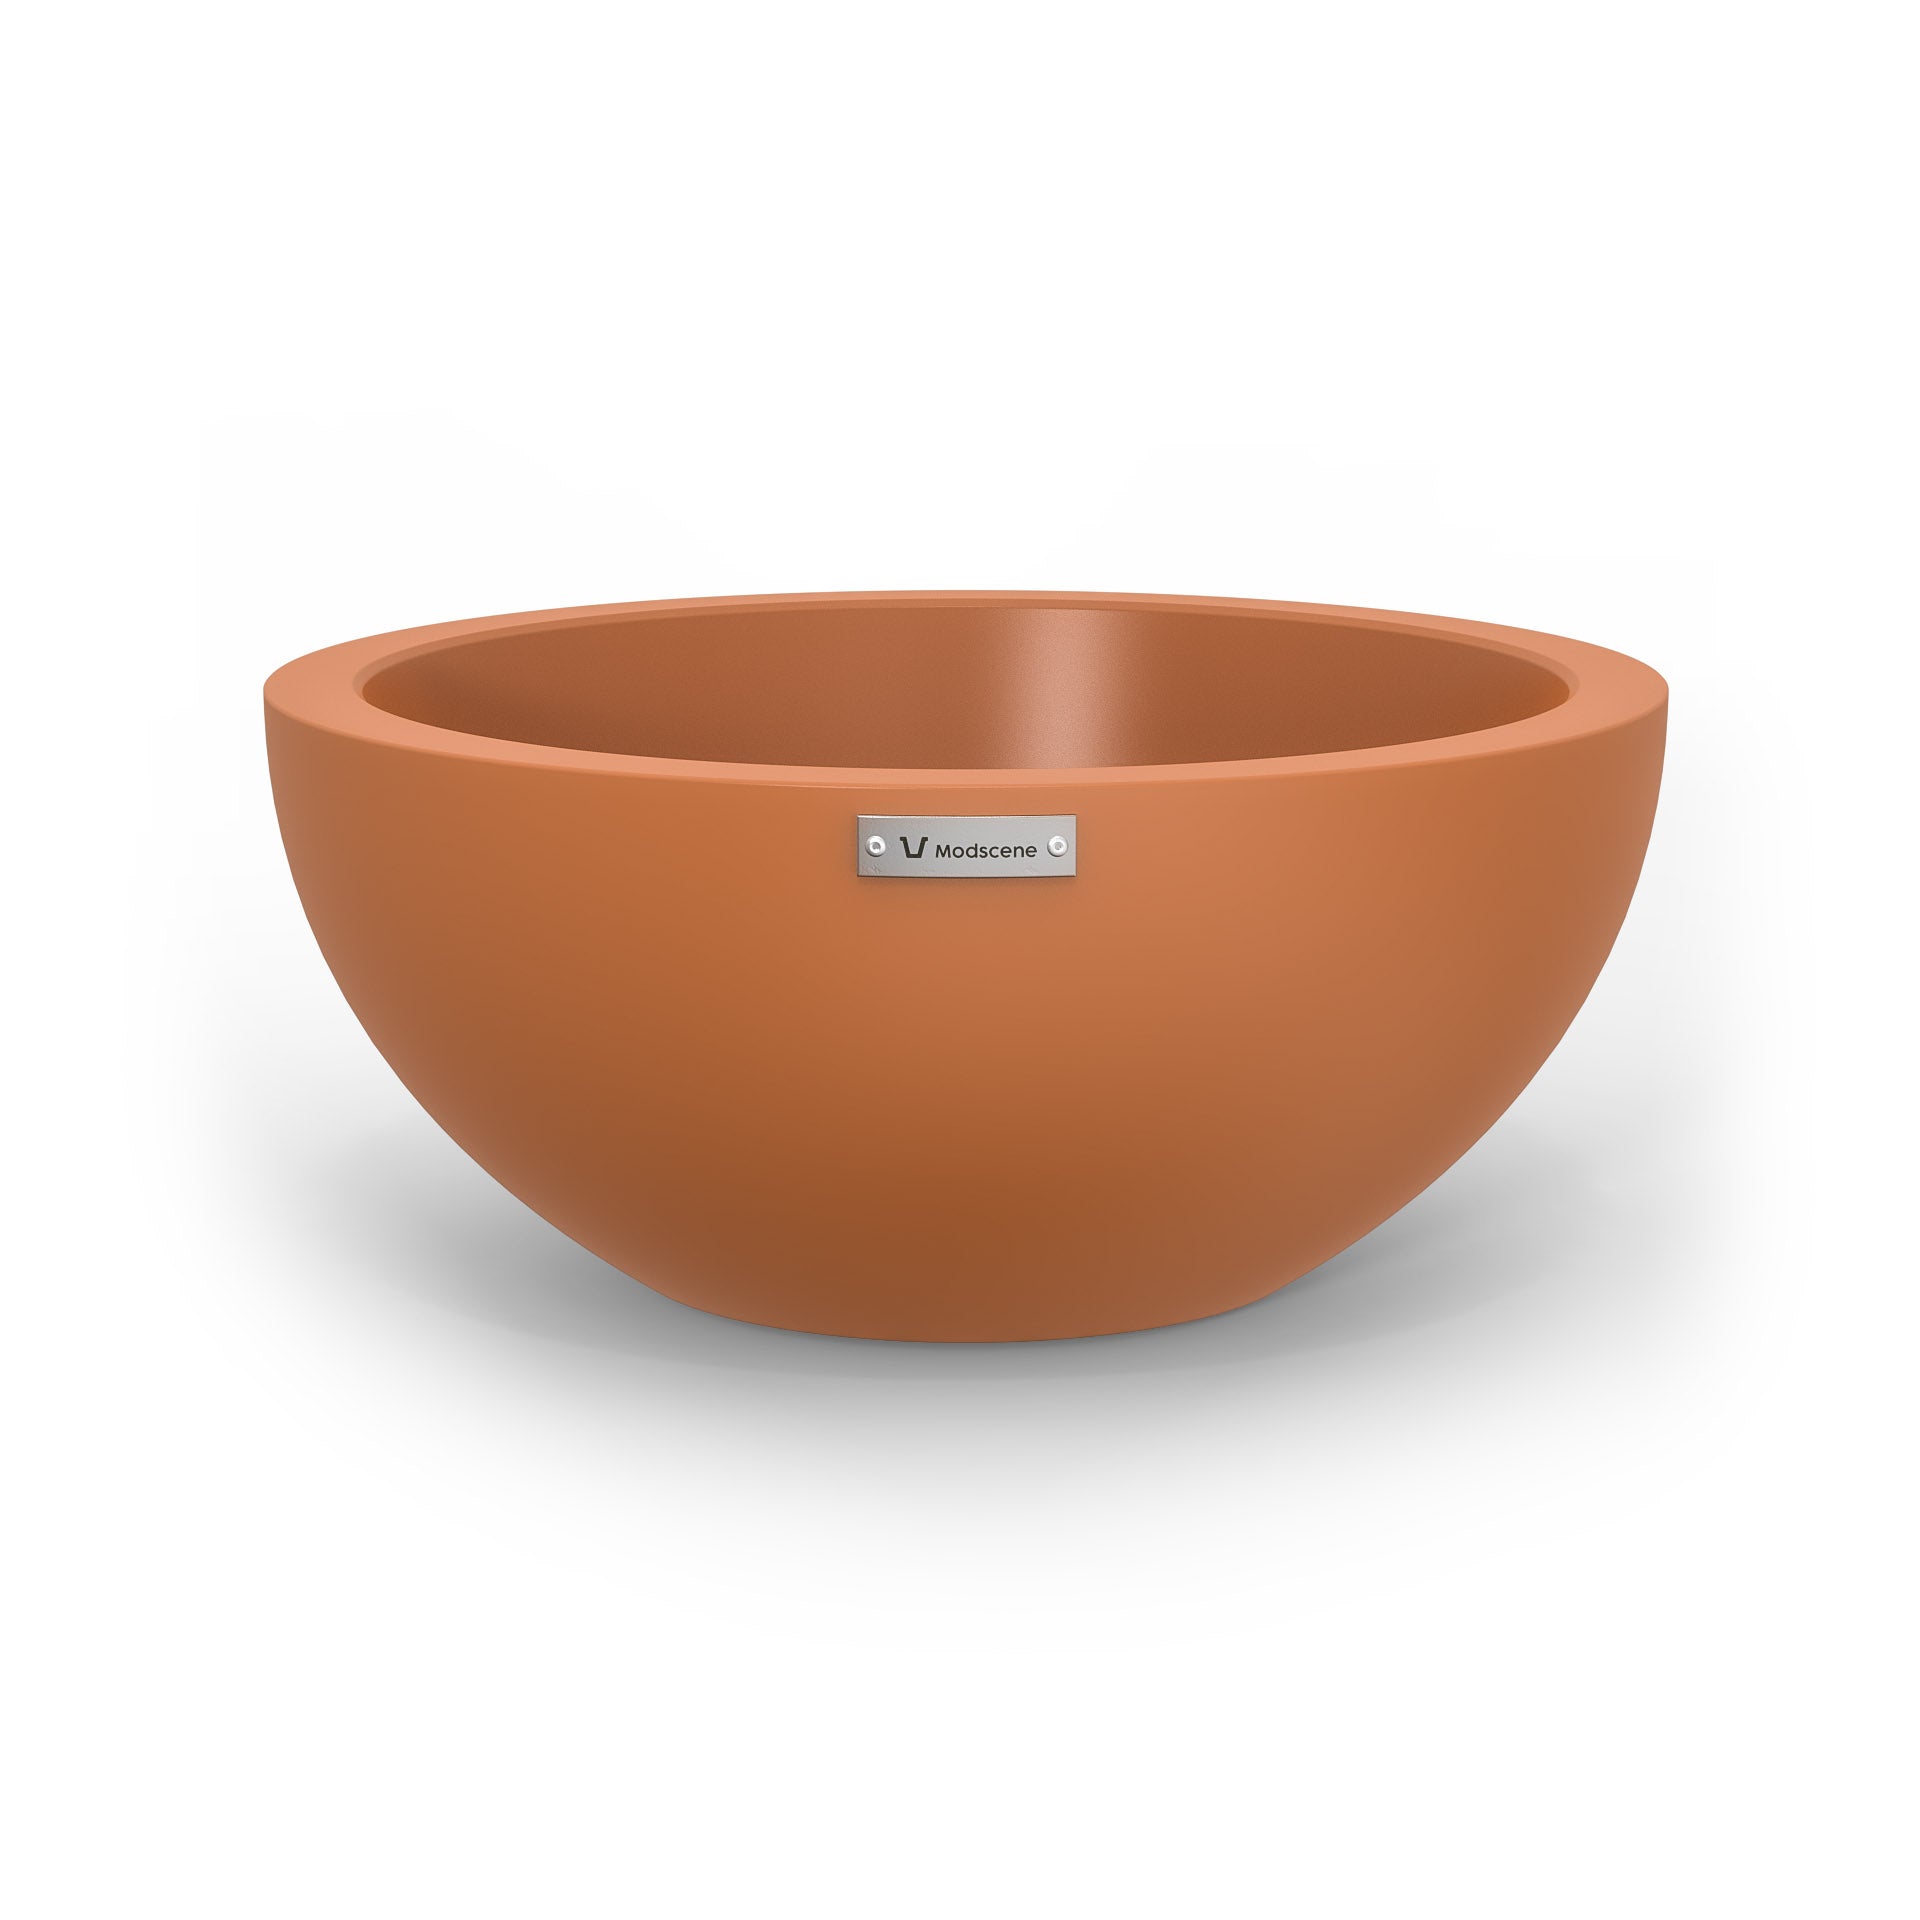 A small Modscene planter bowl in terracotta. NZ made.